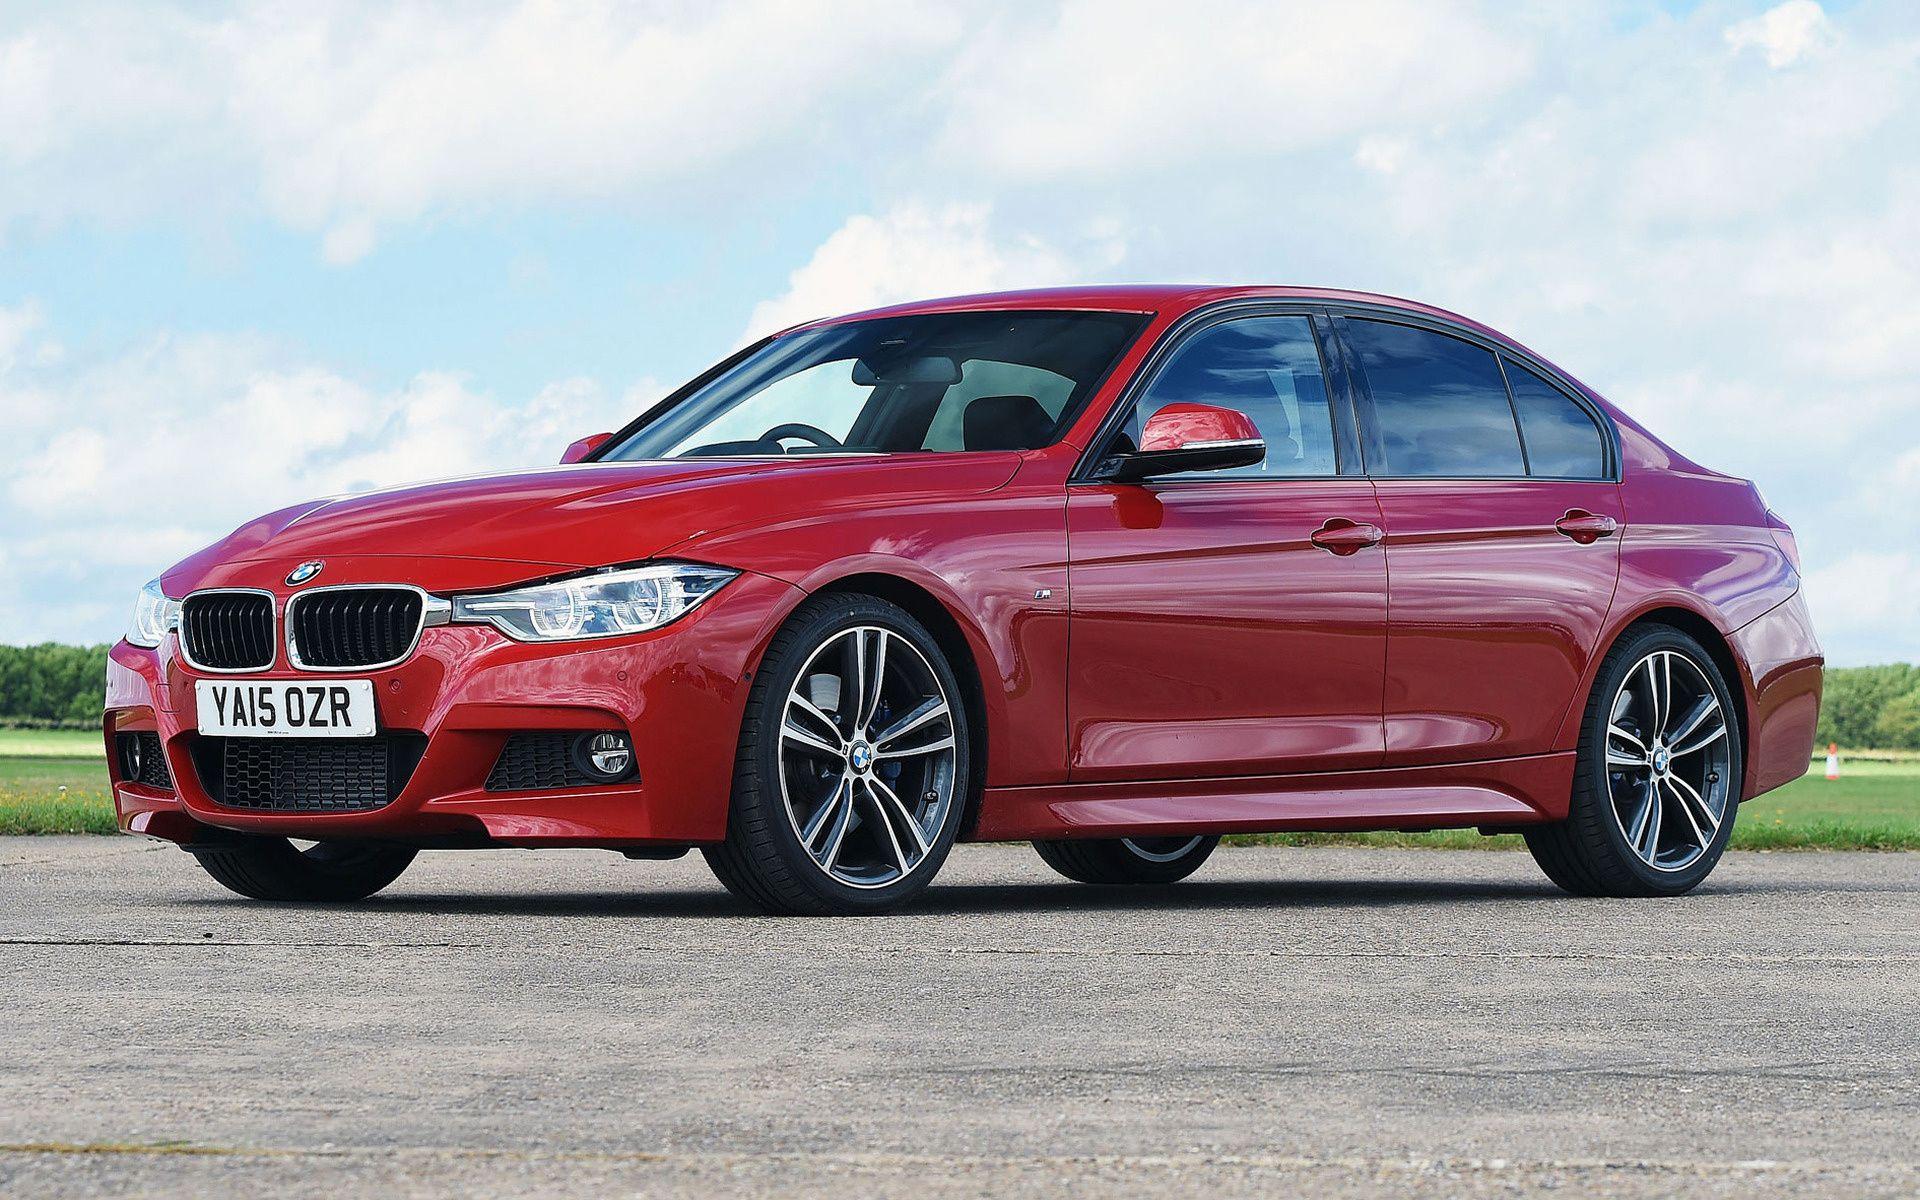 BMW 320d M Sport (2015) UK Wallpaper and HD Image